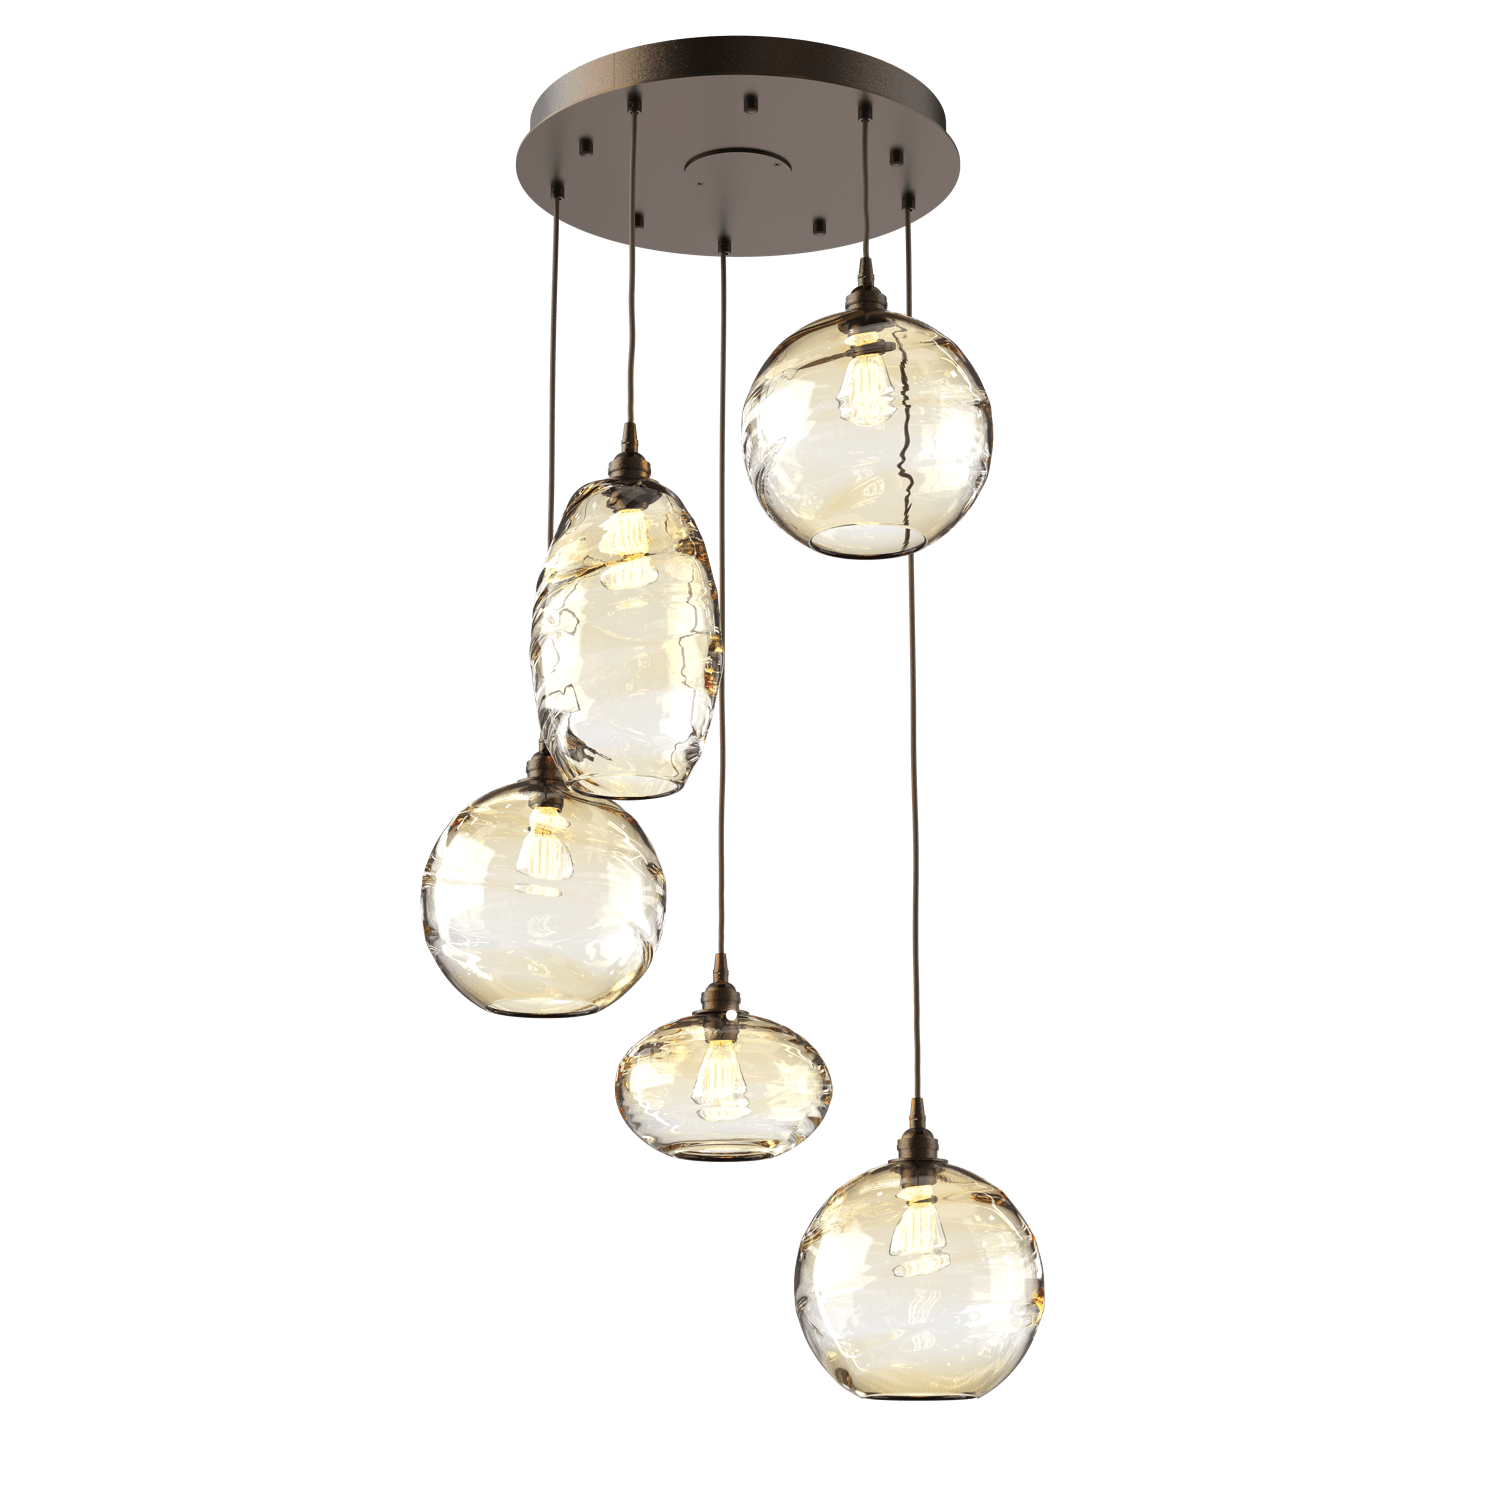 CHB0048-05-FB-OA-Hammerton-Studio-Optic-Blown-Glass-Misto-5-light-round-pendant-chandelier-with-flat-bronze-finish-and-optic-amber-blown-glass-shades-and-incandescent-lamping